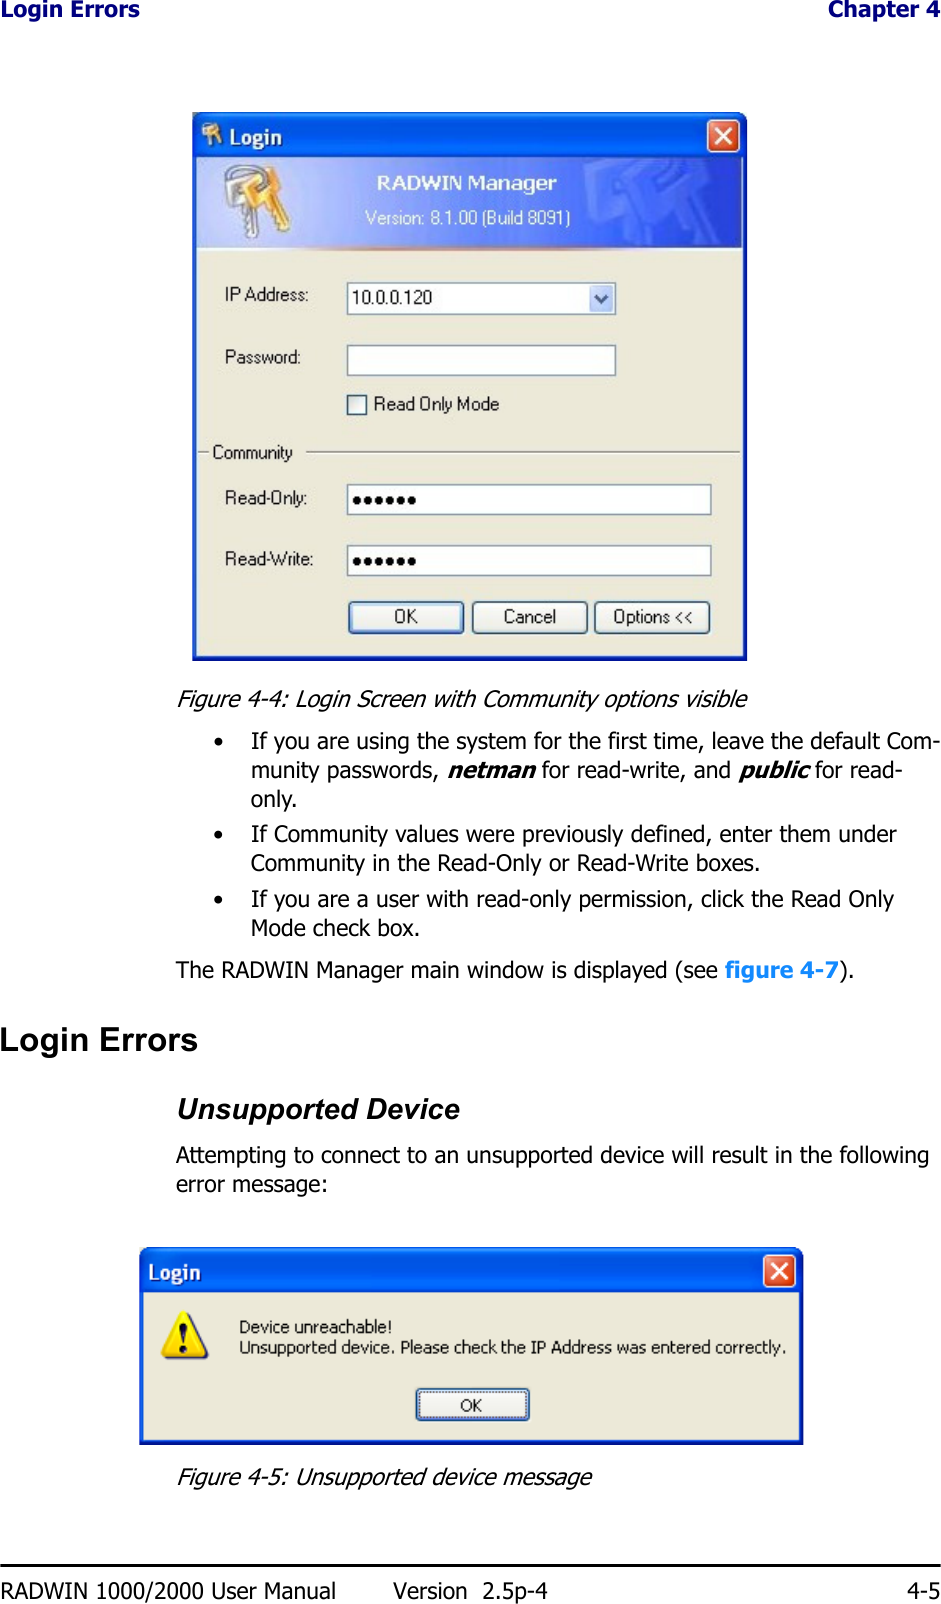 Login Errors  Chapter 4RADWIN 1000/2000 User Manual Version  2.5p-4 4-5Figure 4-4: Login Screen with Community options visible• If you are using the system for the first time, leave the default Com-munity passwords, netman for read-write, and public for read-only.• If Community values were previously defined, enter them under Community in the Read-Only or Read-Write boxes.• If you are a user with read-only permission, click the Read Only Mode check box.The RADWIN Manager main window is displayed (see figure 4-7).Login ErrorsUnsupported DeviceAttempting to connect to an unsupported device will result in the following error message:Figure 4-5: Unsupported device message